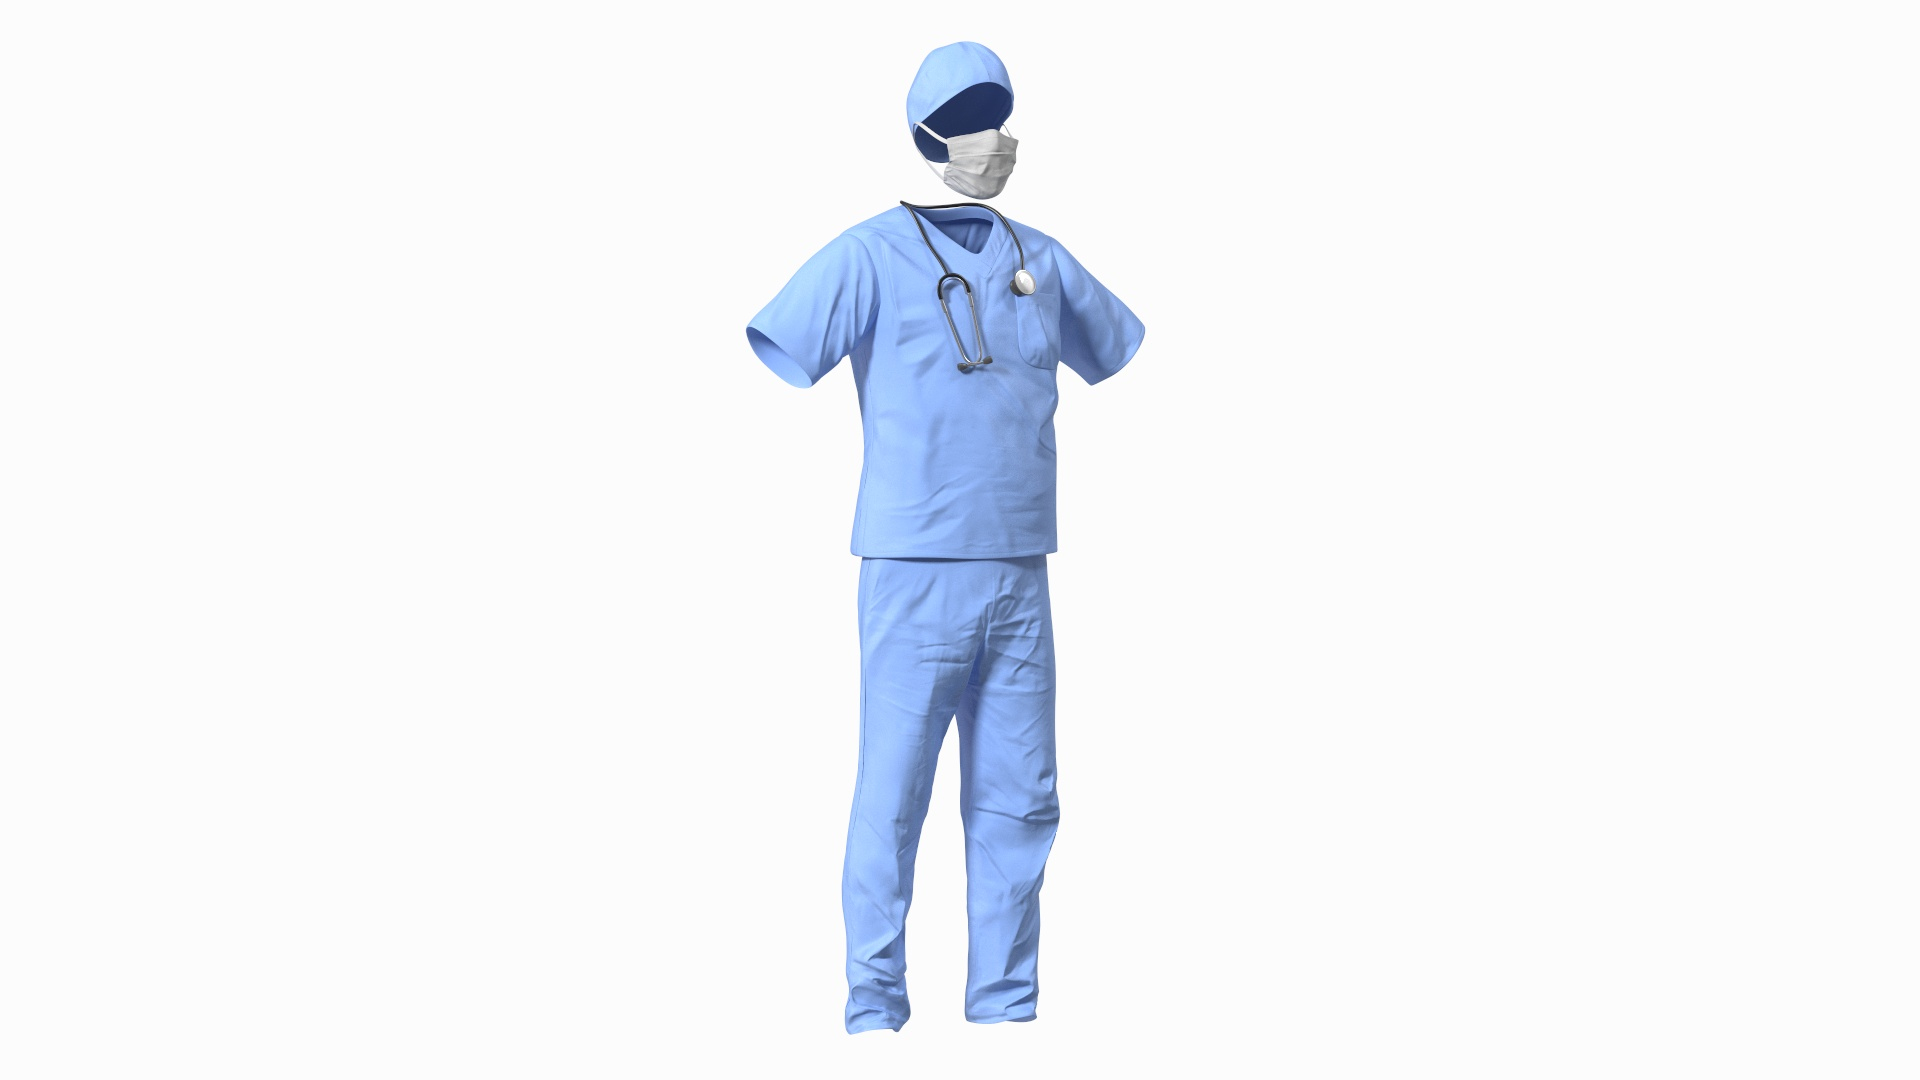 Navy Blue Scrub Suit for Doctors Price, Information and Pictures